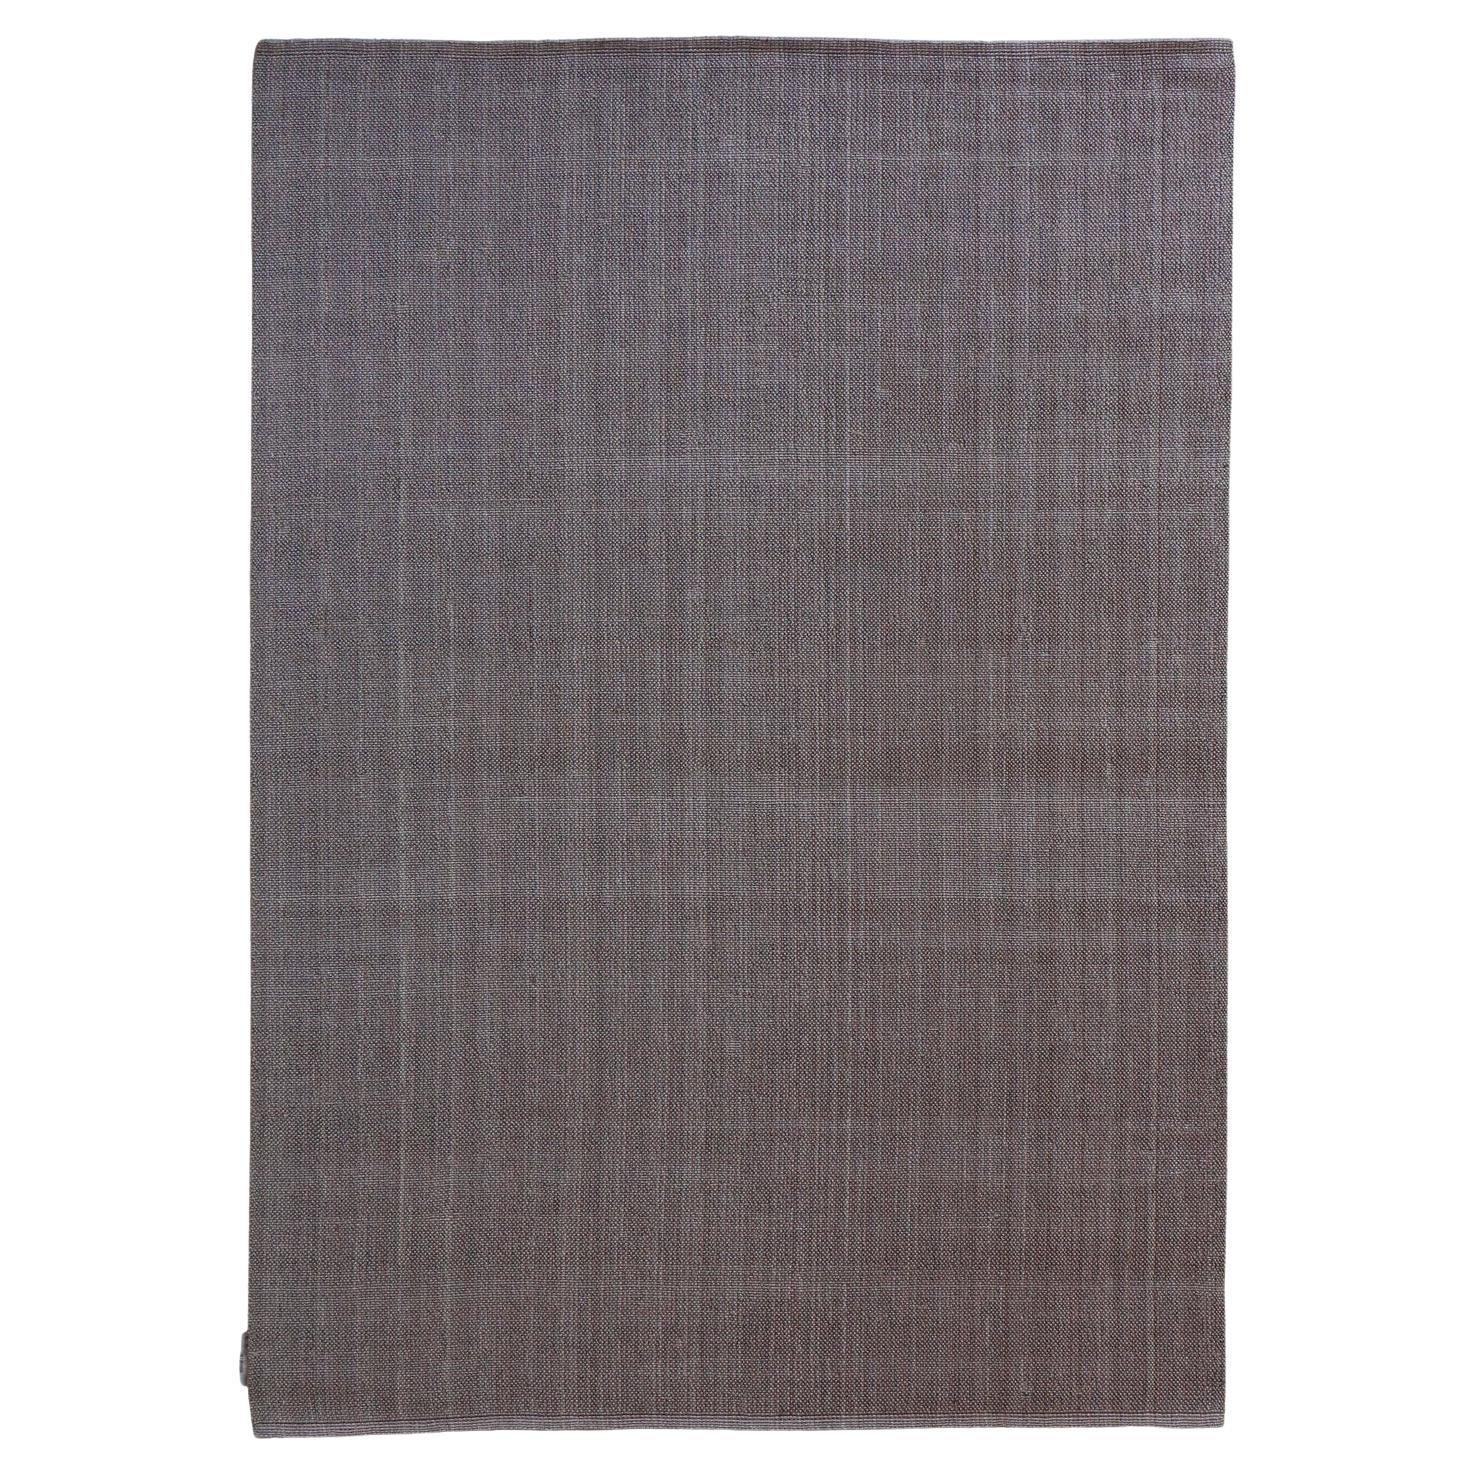 Contemporary Design Grey Lilac Rug by Deanna Comellini In Stock 170x240 cm For Sale